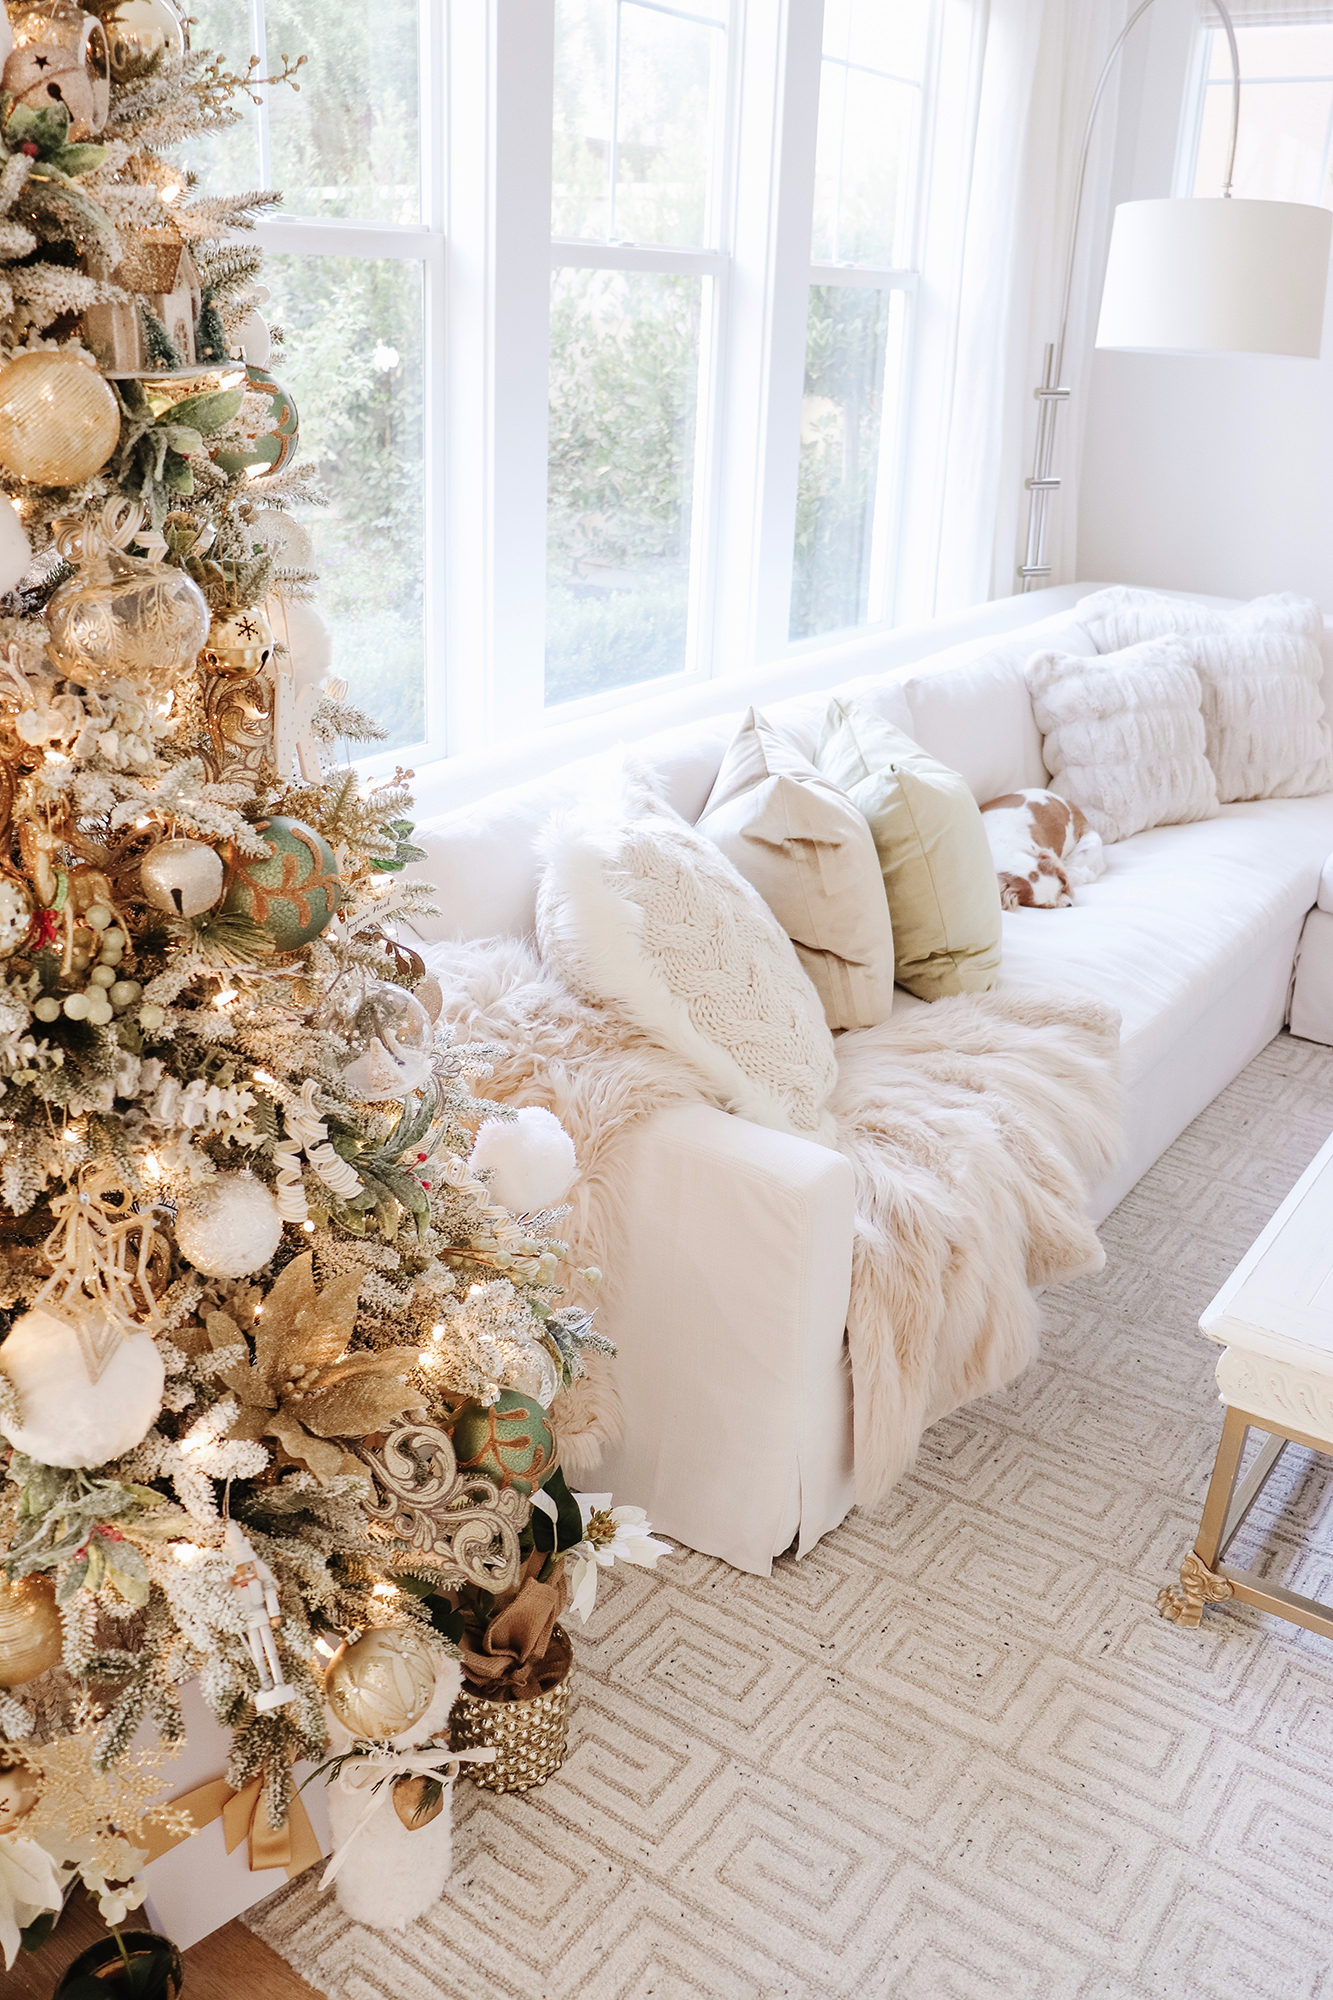 Cozy Christmas Decor - My Family Room! Showcasing my green, gold & white themed Christmas tree. My style is natural & neutral this year.. all links/sources.